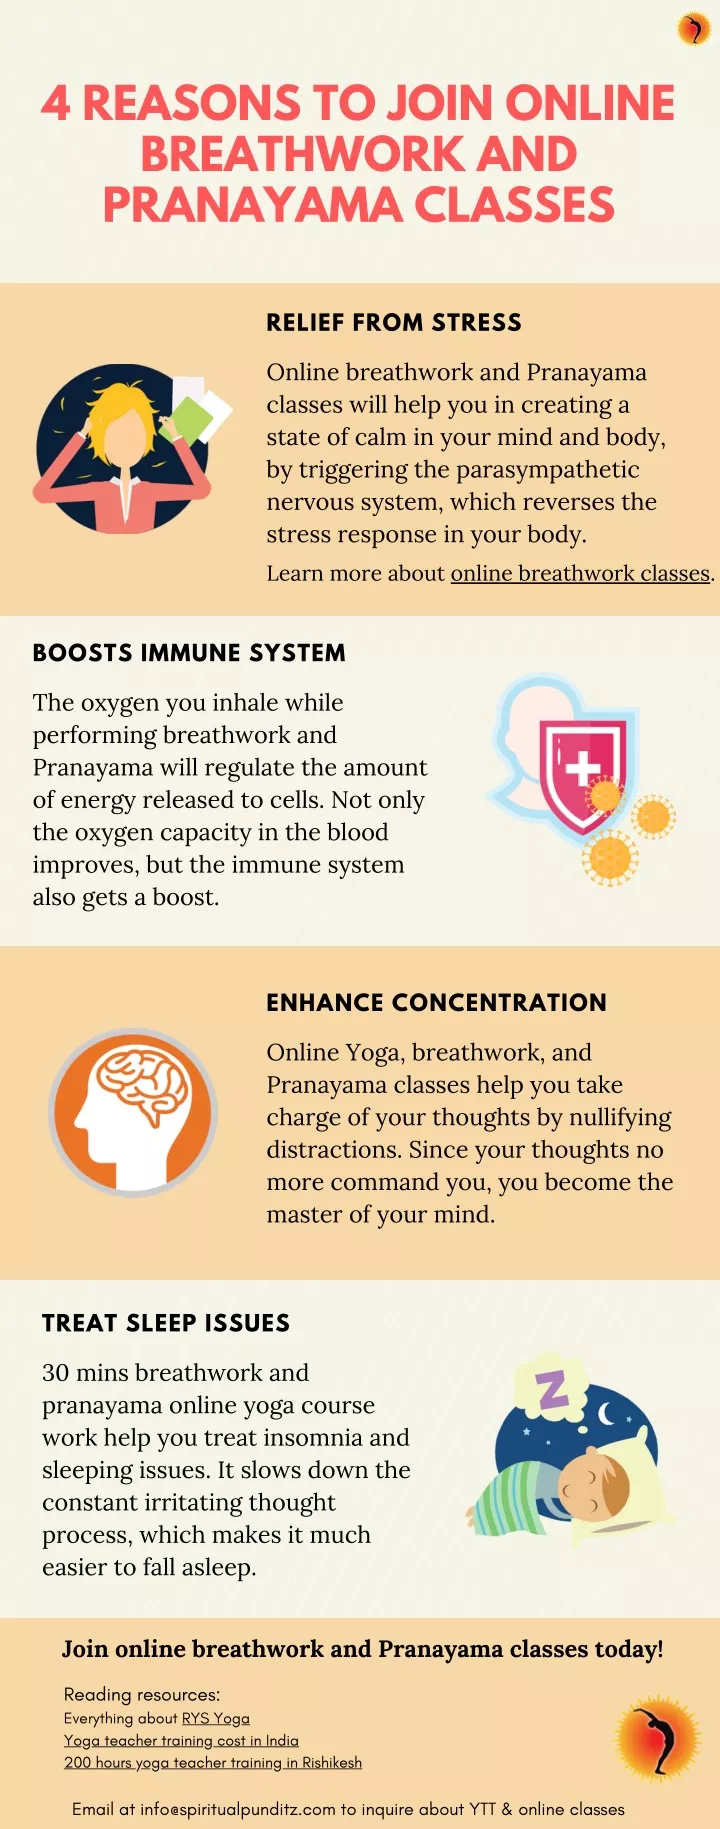 4 reasons to join online breathwork and pranayama